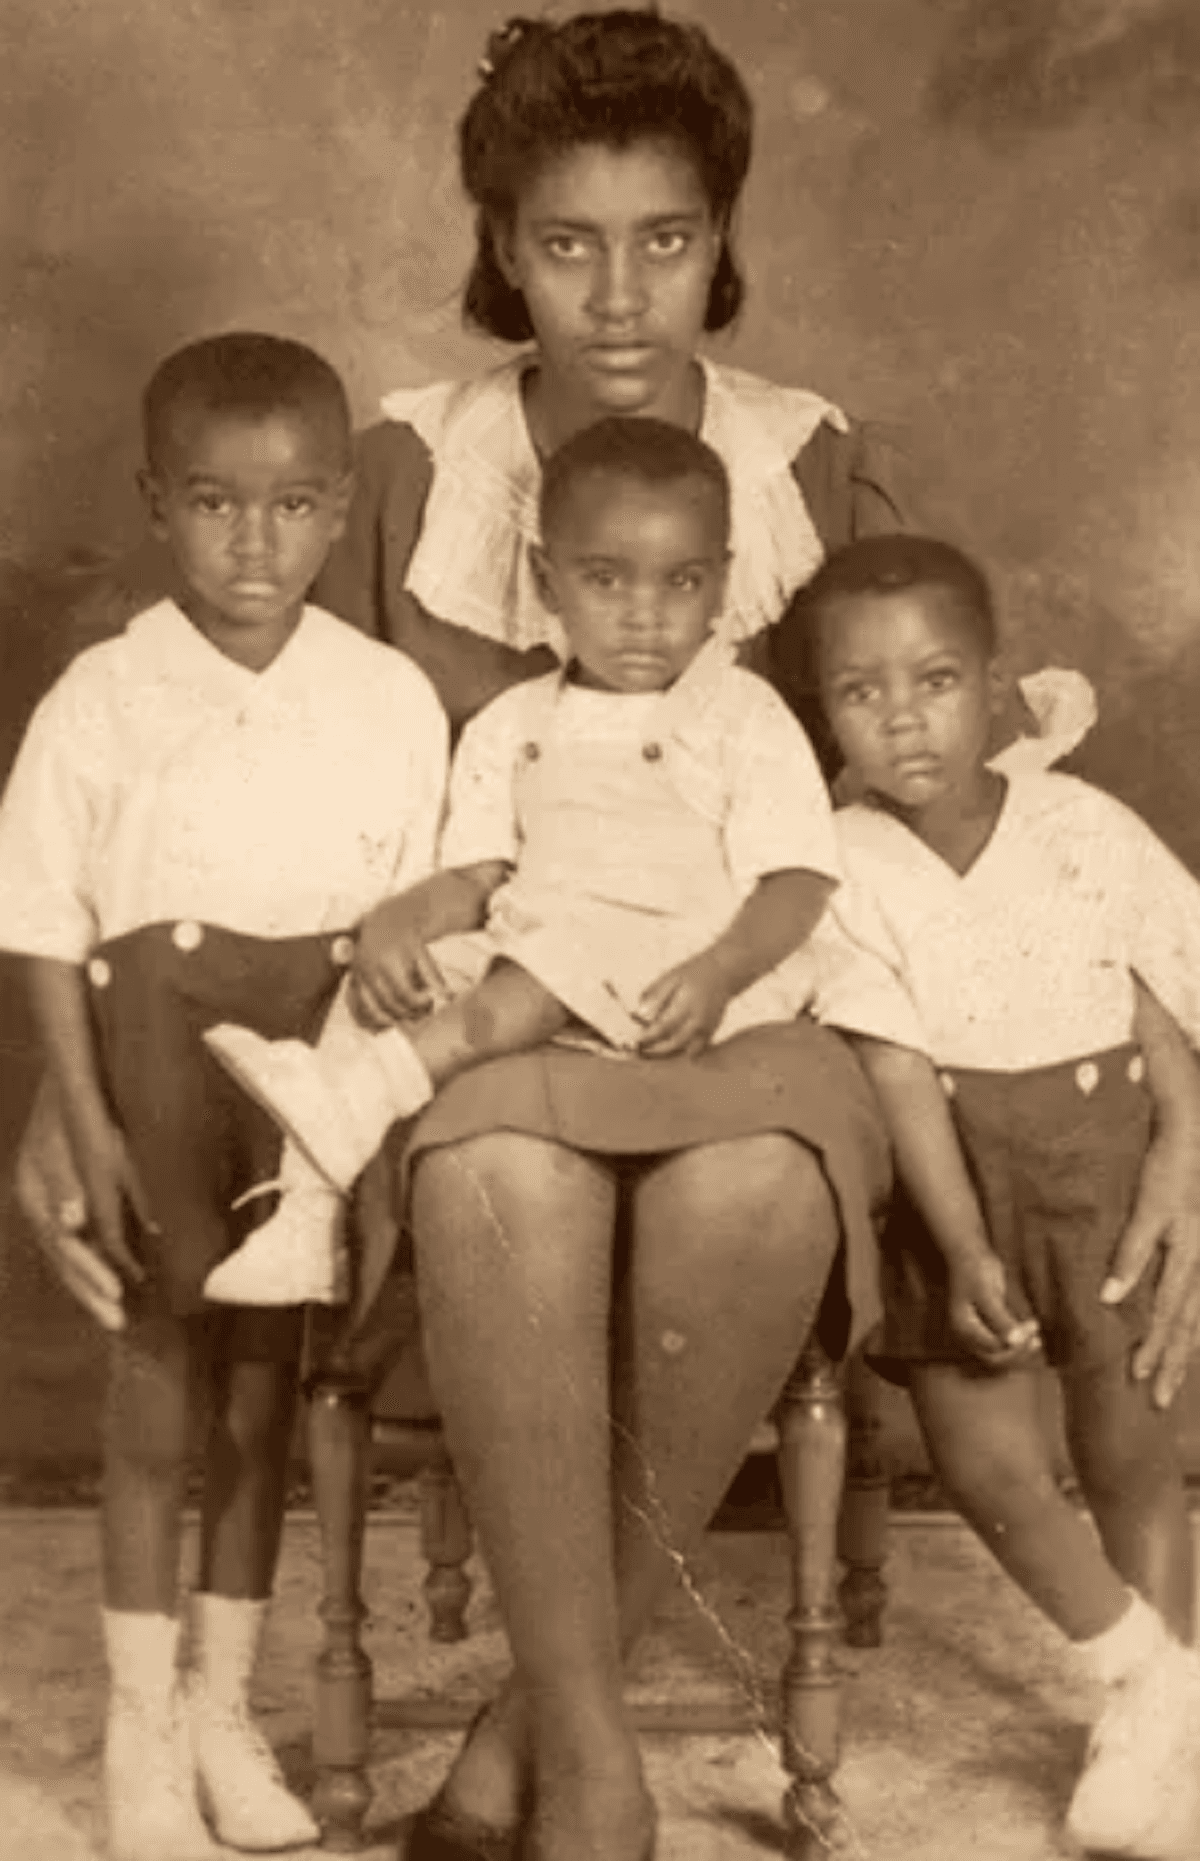  Ms. Whiteside at 19 with her sons Cleovis Jr., James, and Willie. (Courtesy of Kathy Whiteside-Sims)